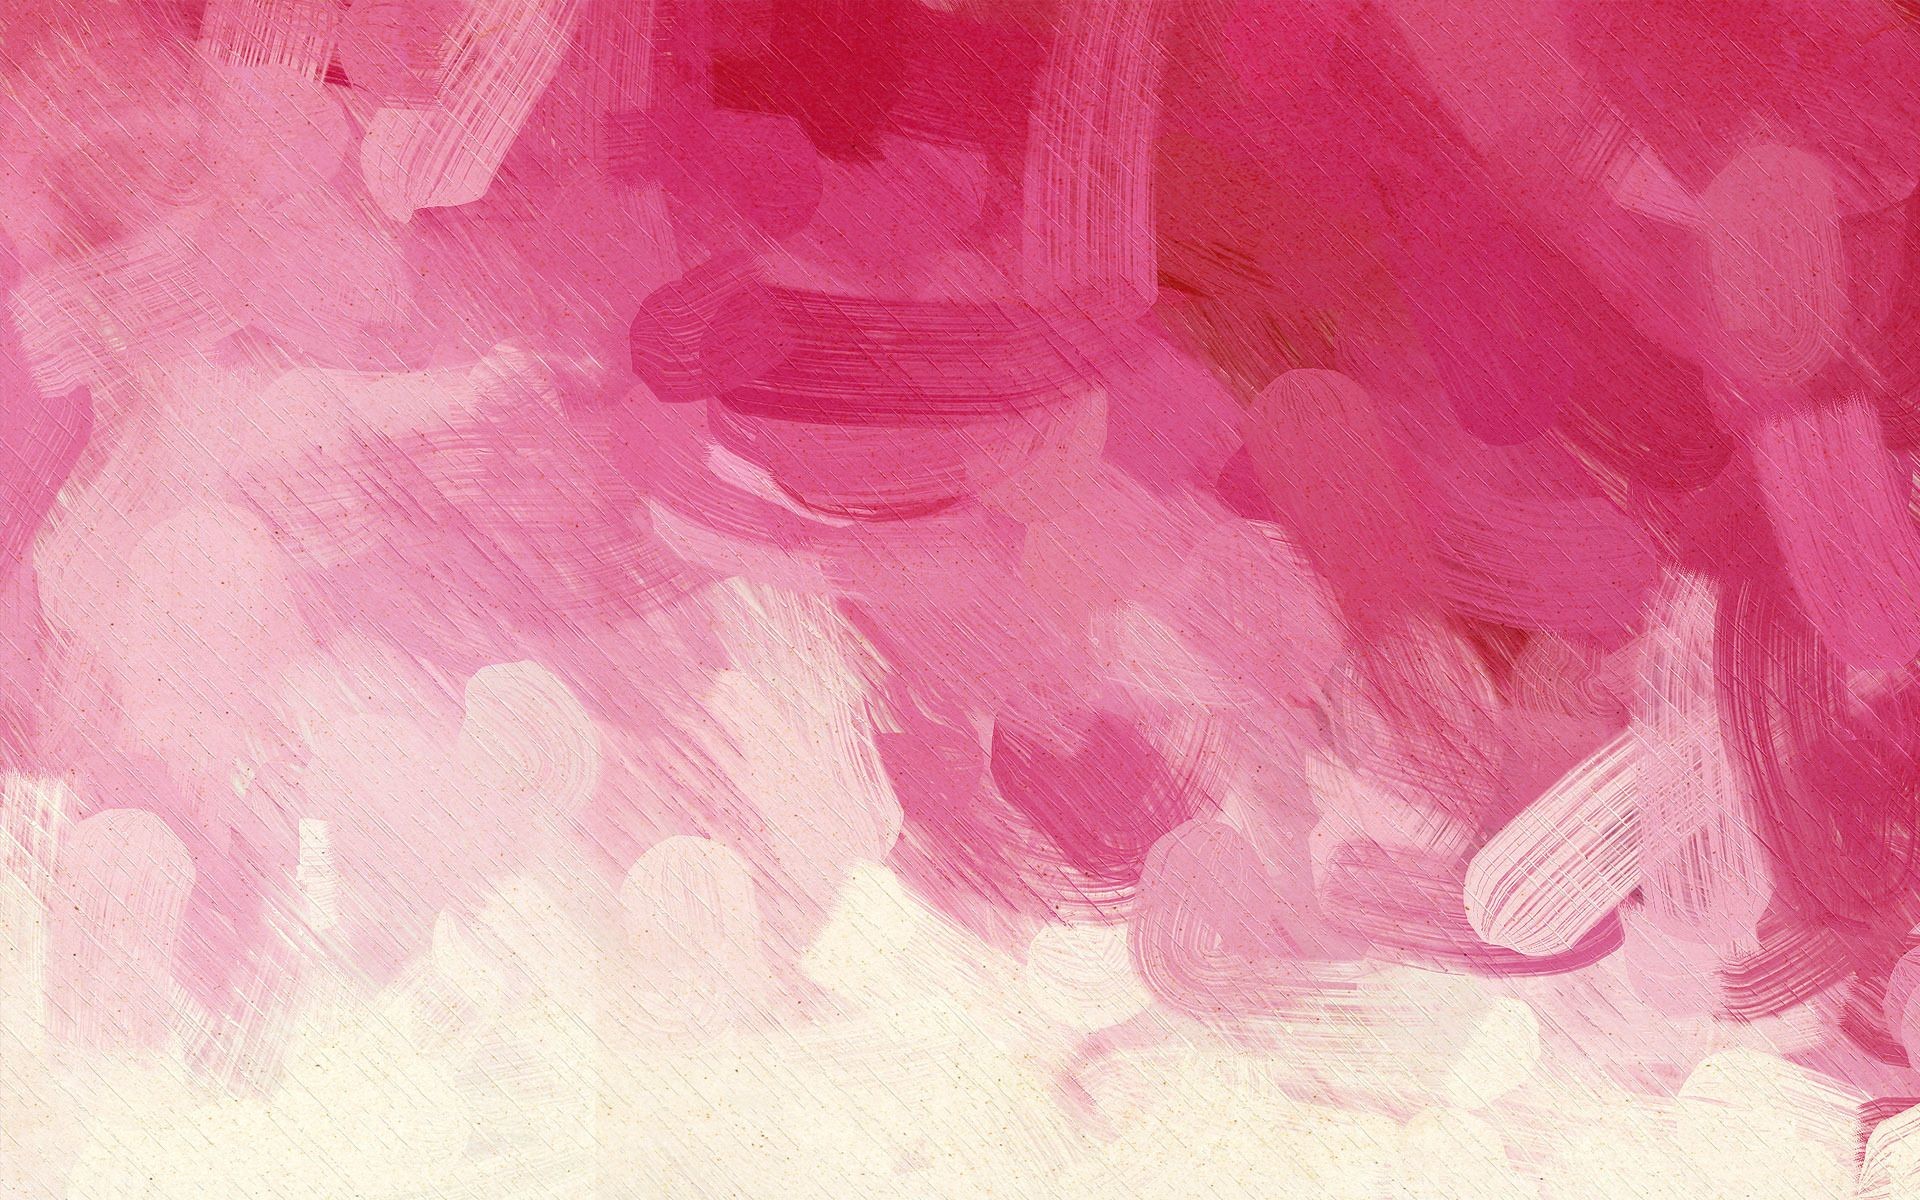 1920x1200 artsy painted backgrounds | Pink paint strokes HD Wallpaper 1920x1080 Pink  paint strokes HD .